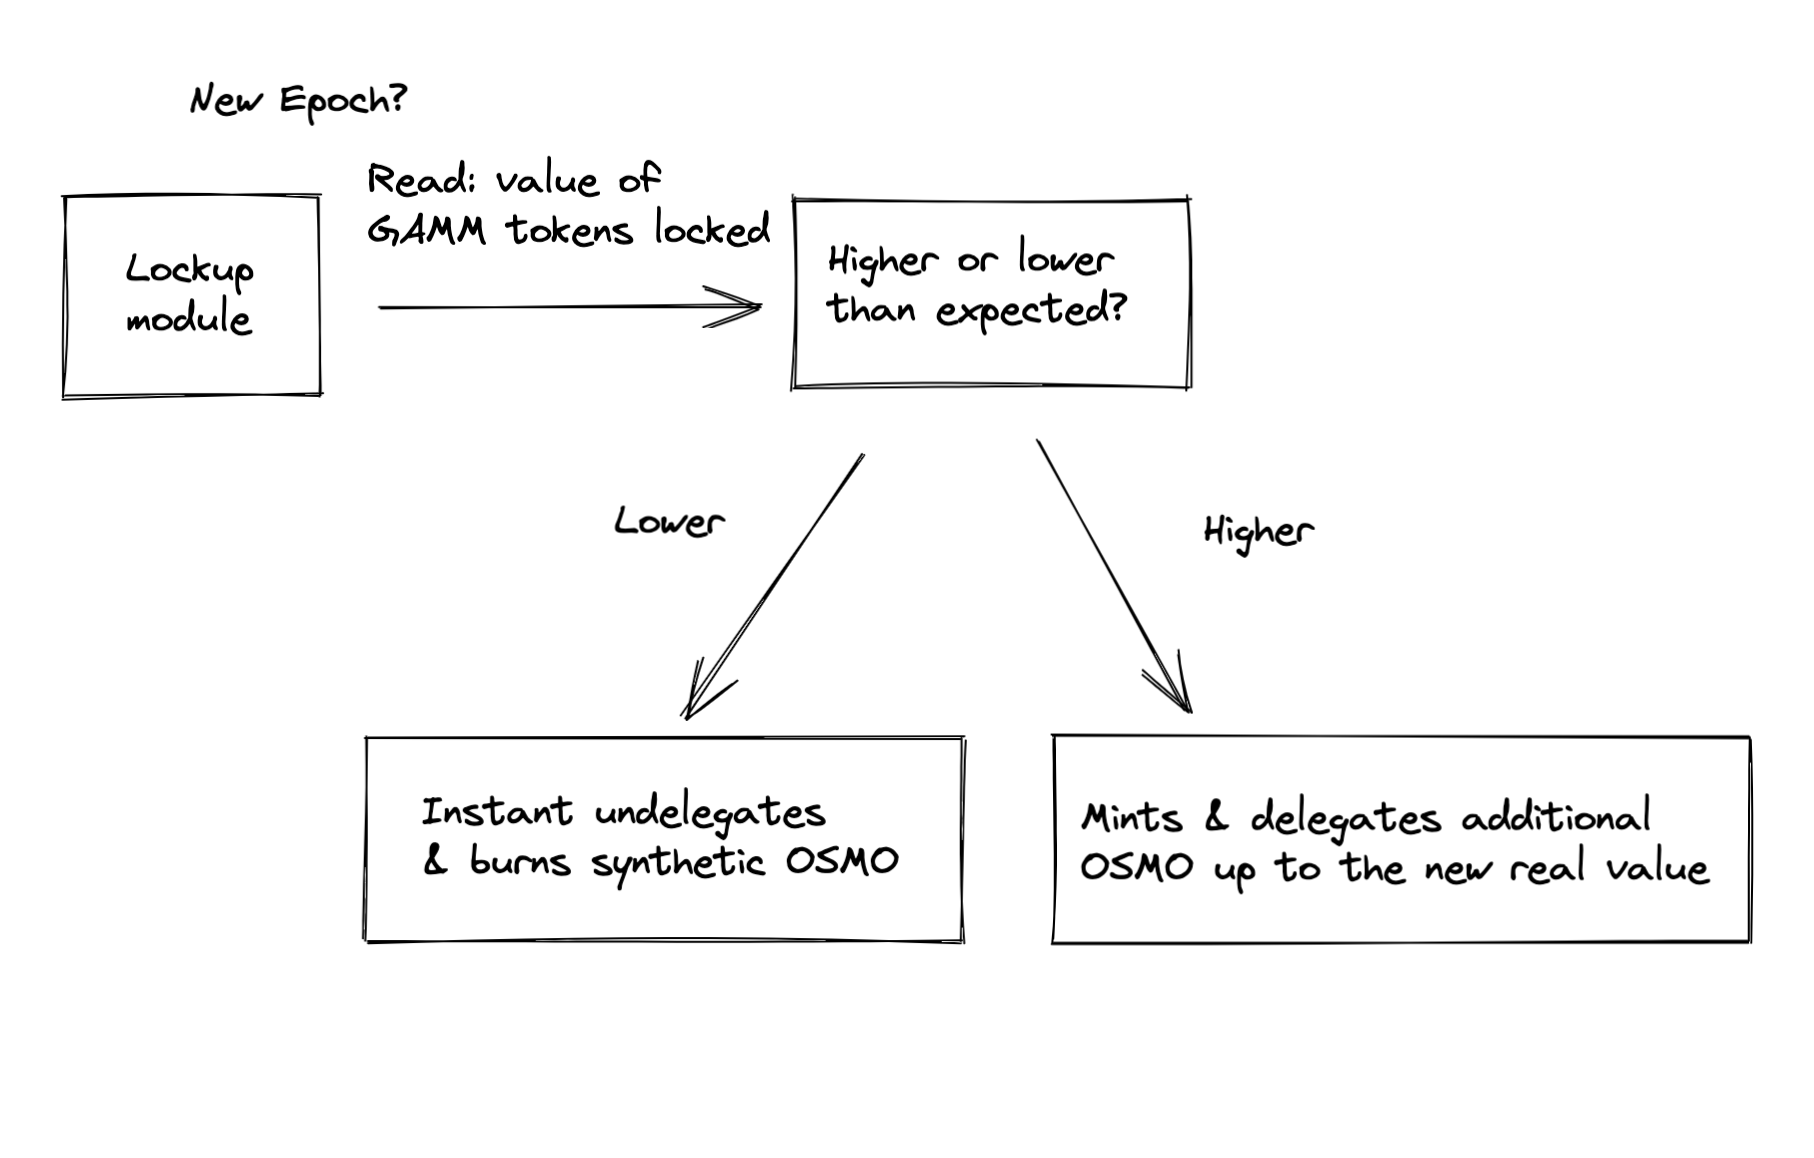 How LPed $OSMO stake is managed (https://docs.osmosis.zone/osmosis-core/modules/superfluid/)